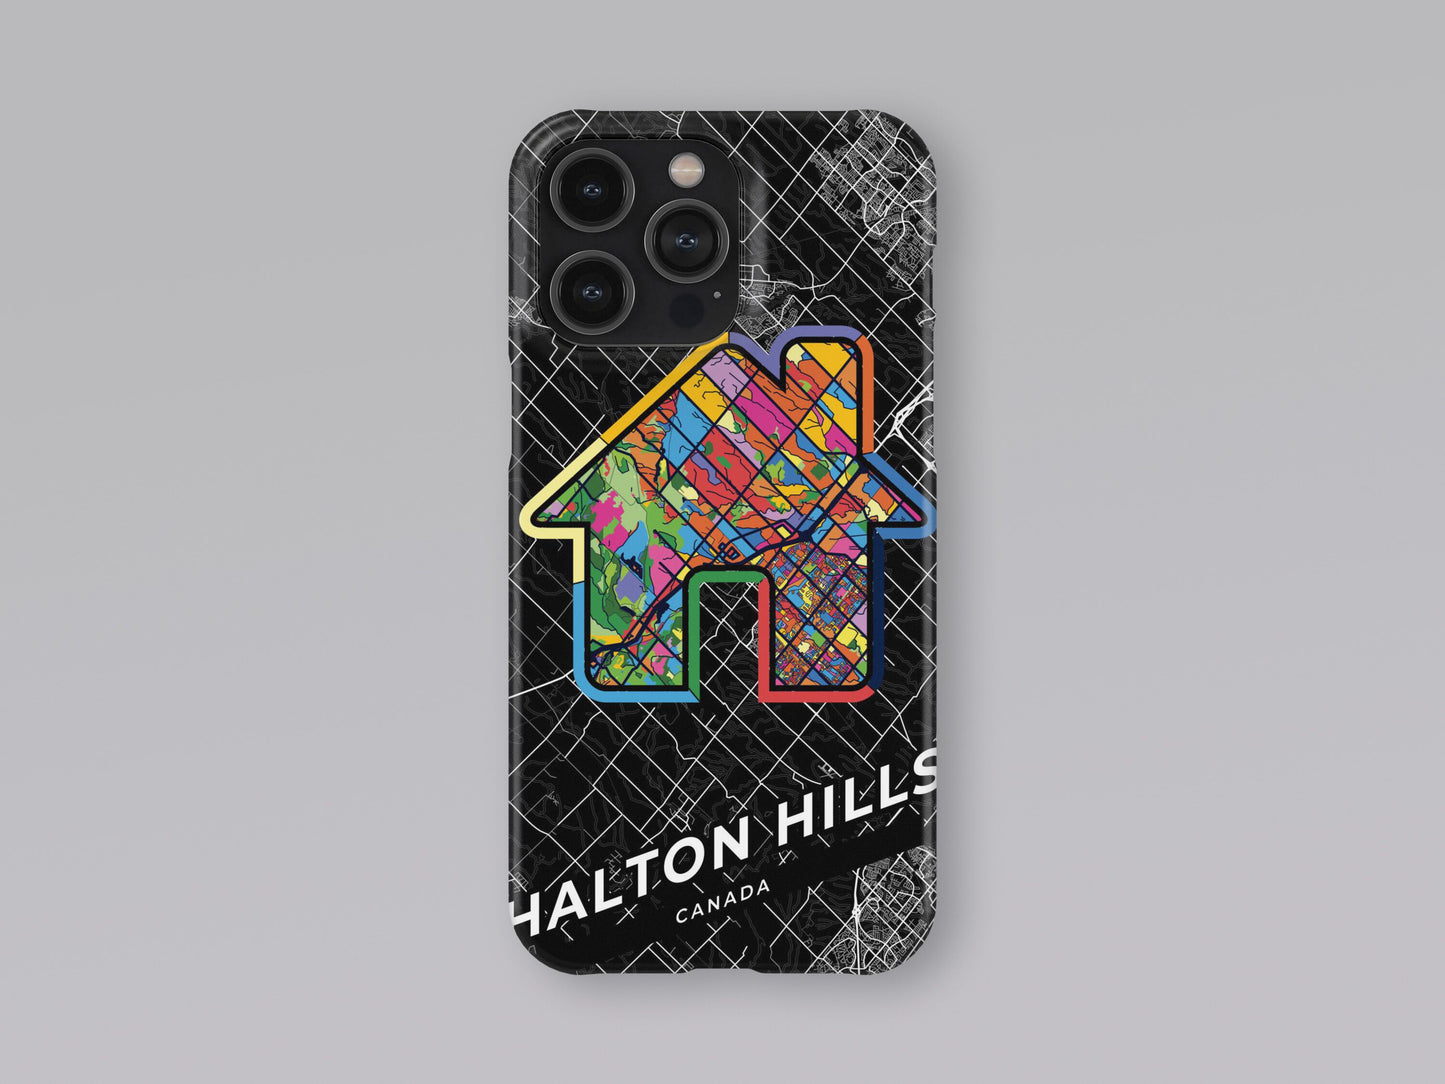 Halton Hills Canada slim phone case with colorful icon. Birthday, wedding or housewarming gift. Couple match cases. 3